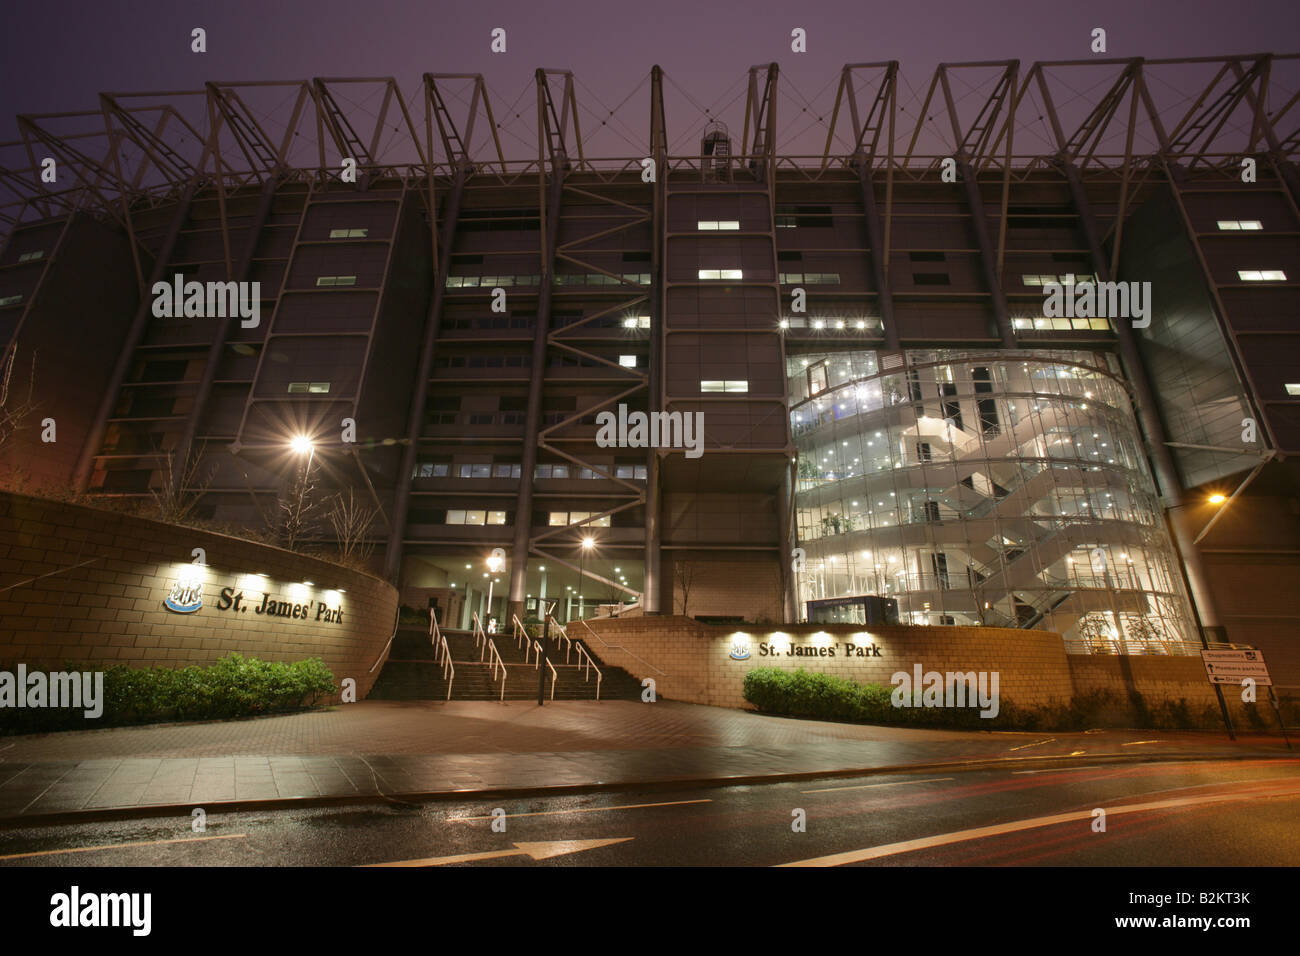 City of Newcastle, England. A night view of the Barrack Road entrance to Newcastle United Football Club ground, St James Park. Stock Photo